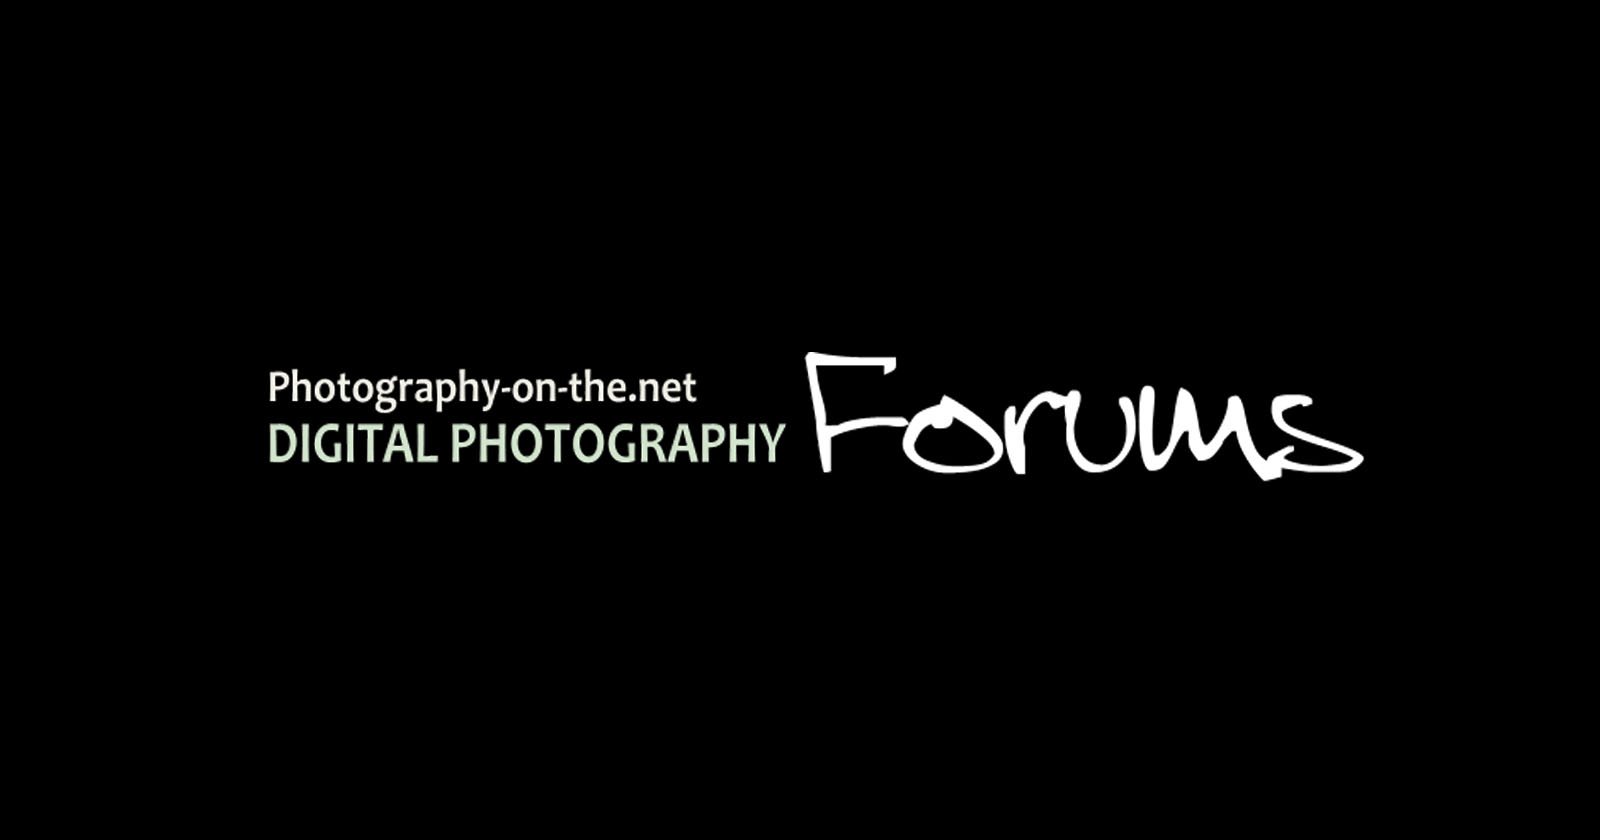  photography-on-the-net forums shutting down 